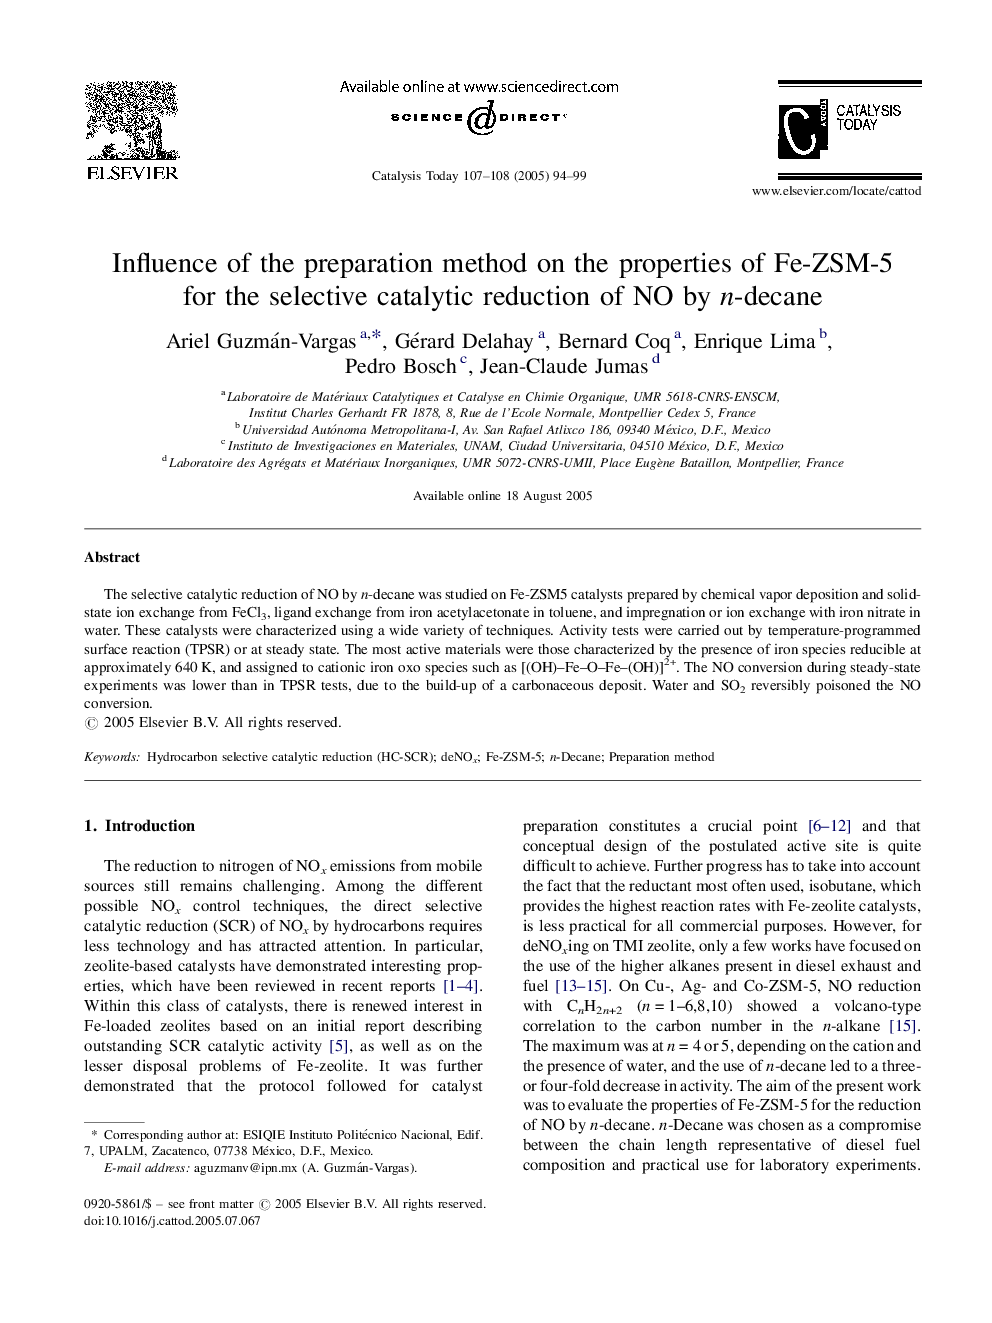 Influence of the preparation method on the properties of Fe-ZSM-5 for the selective catalytic reduction of NO by n-decane